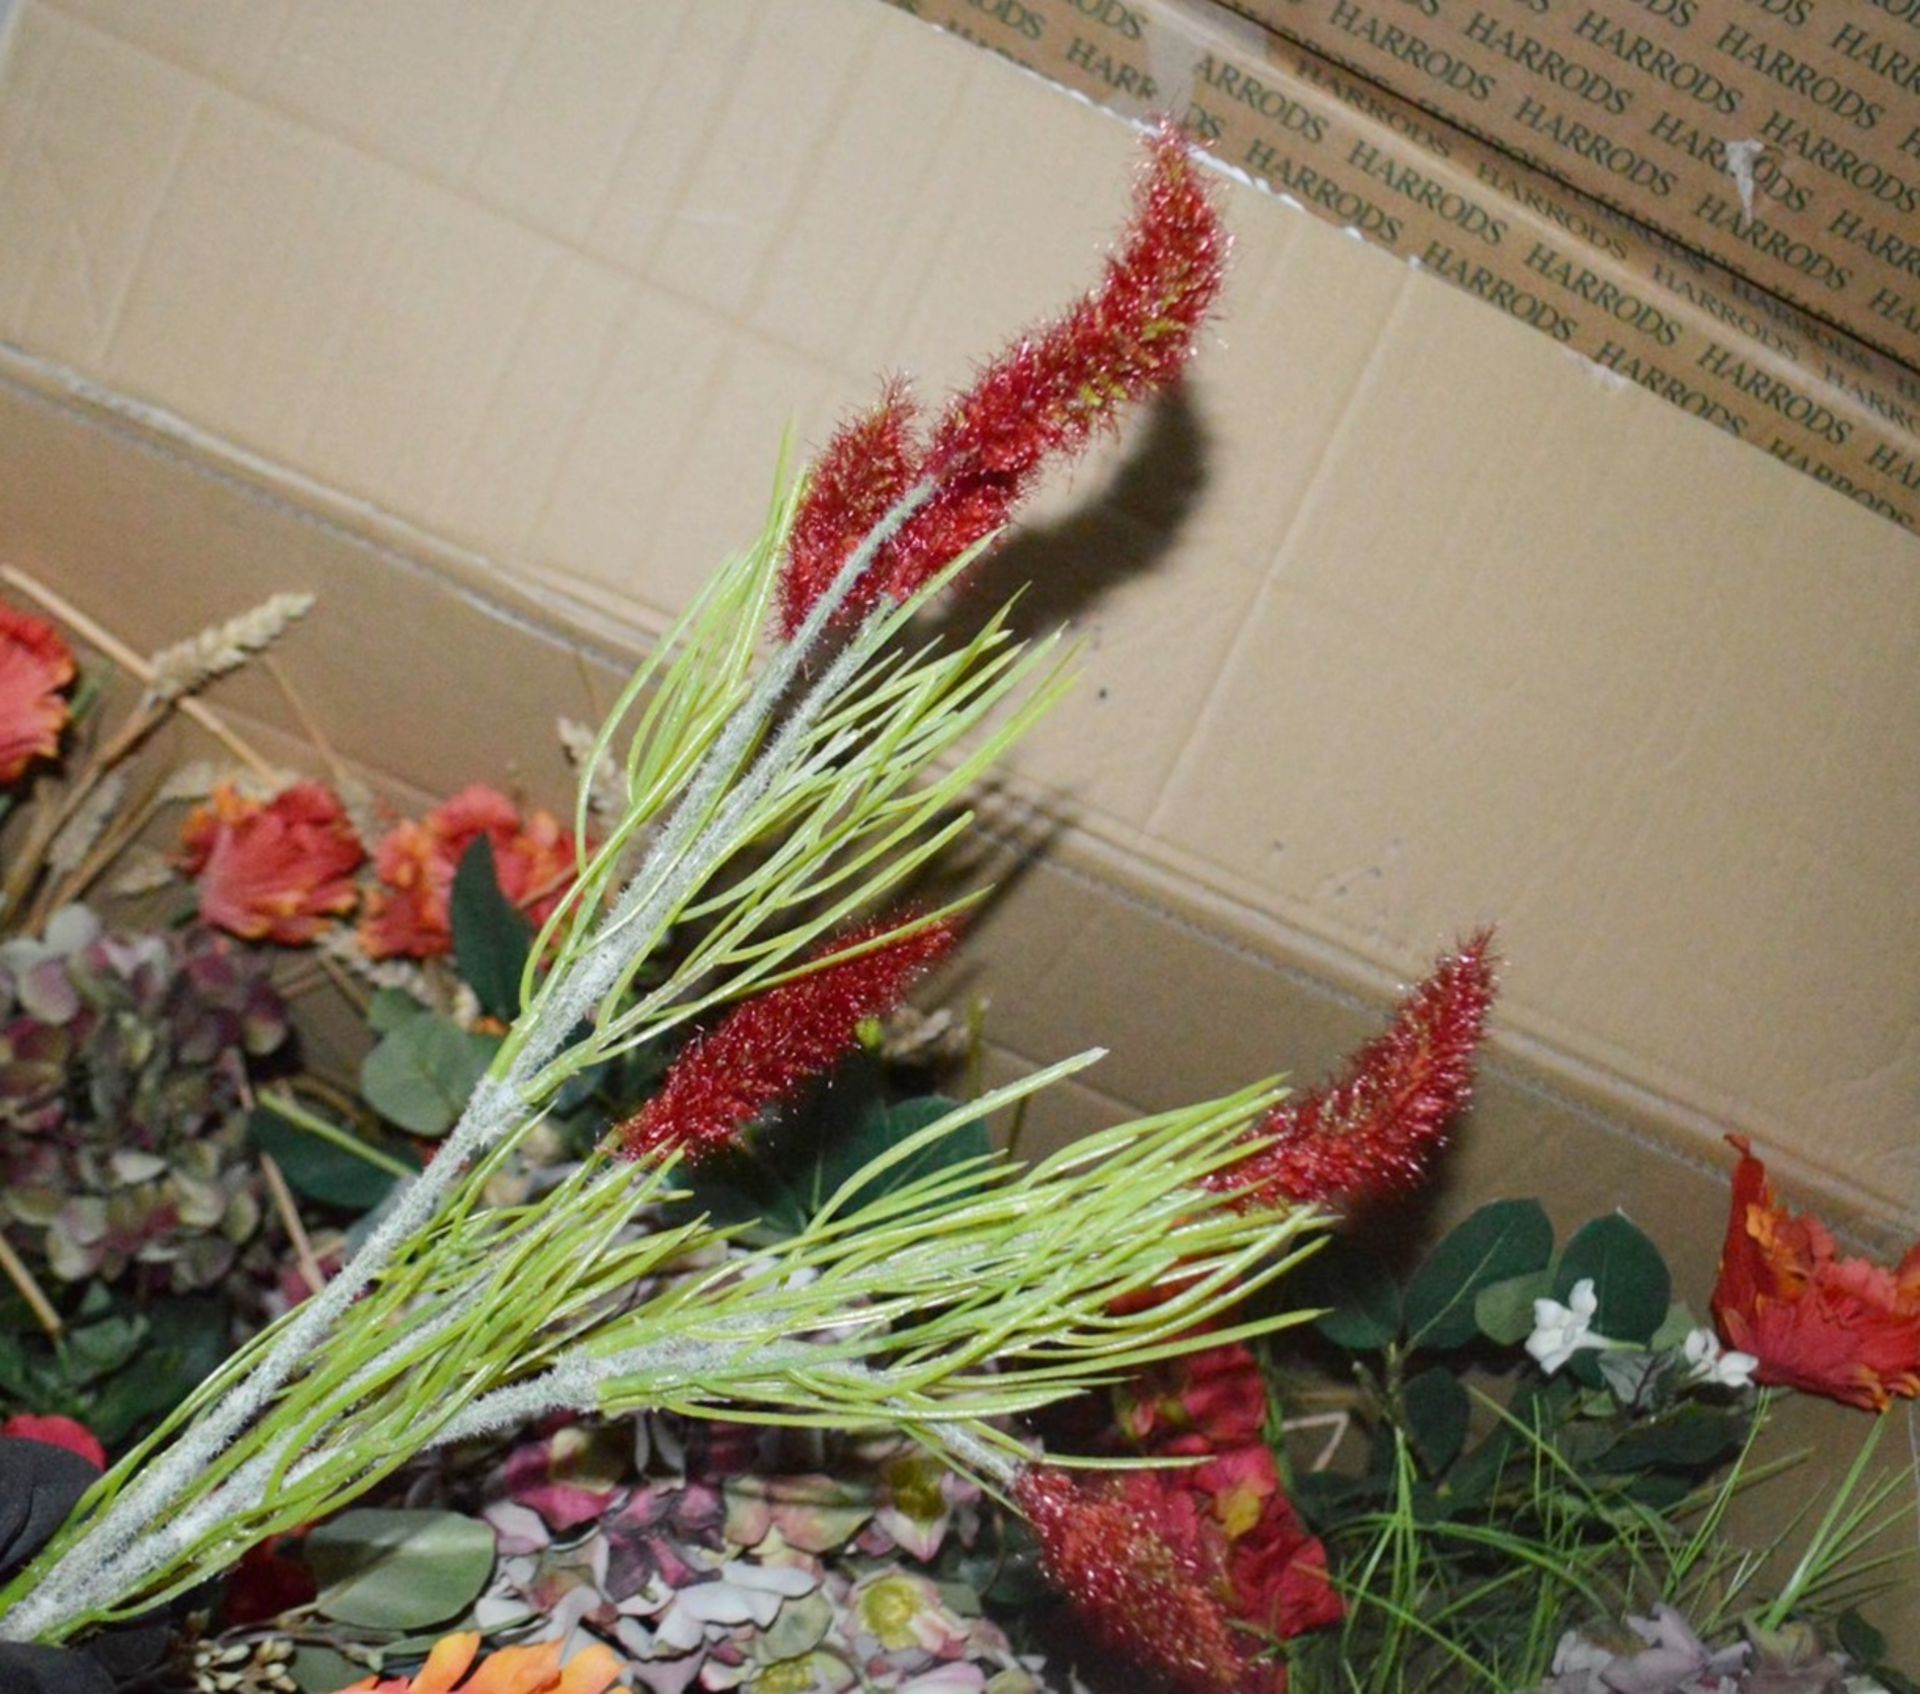 Large Box Of Artificial Wild Flowers and Dried Wheat From High Profile Window / Shop Displays - Image 7 of 7